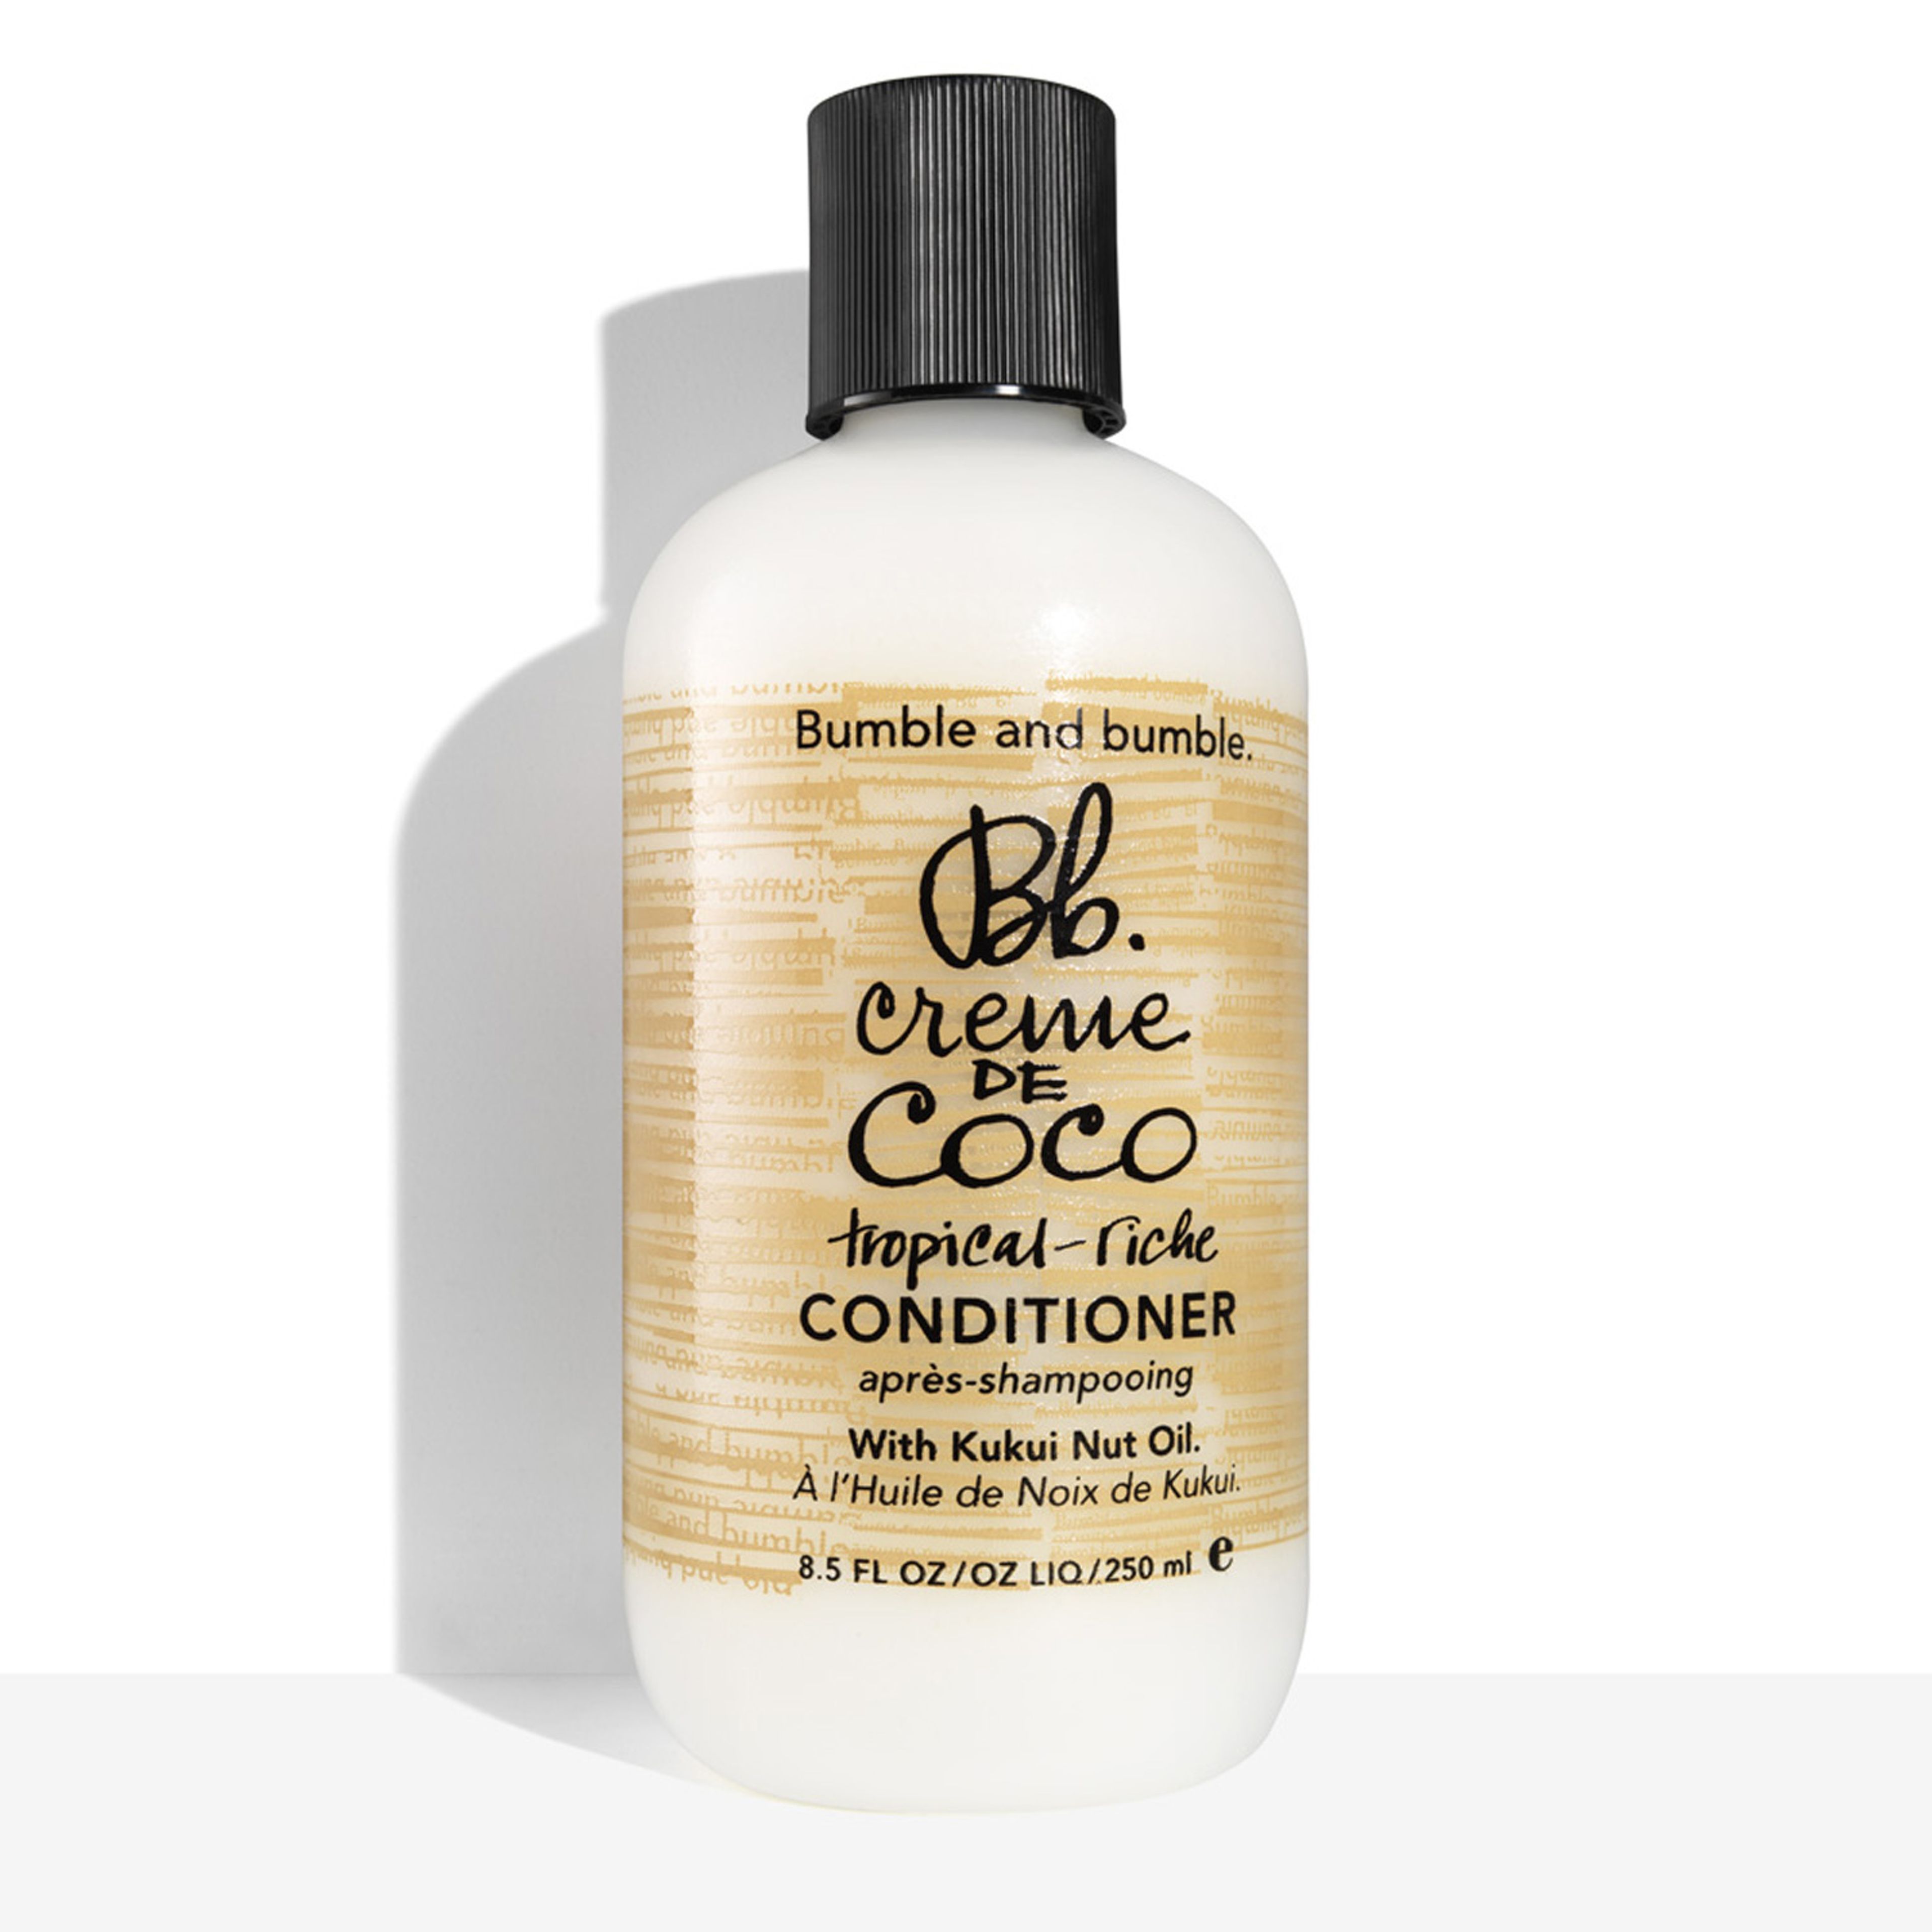 Bumble and bumble Creme De Coco Conditioner 1